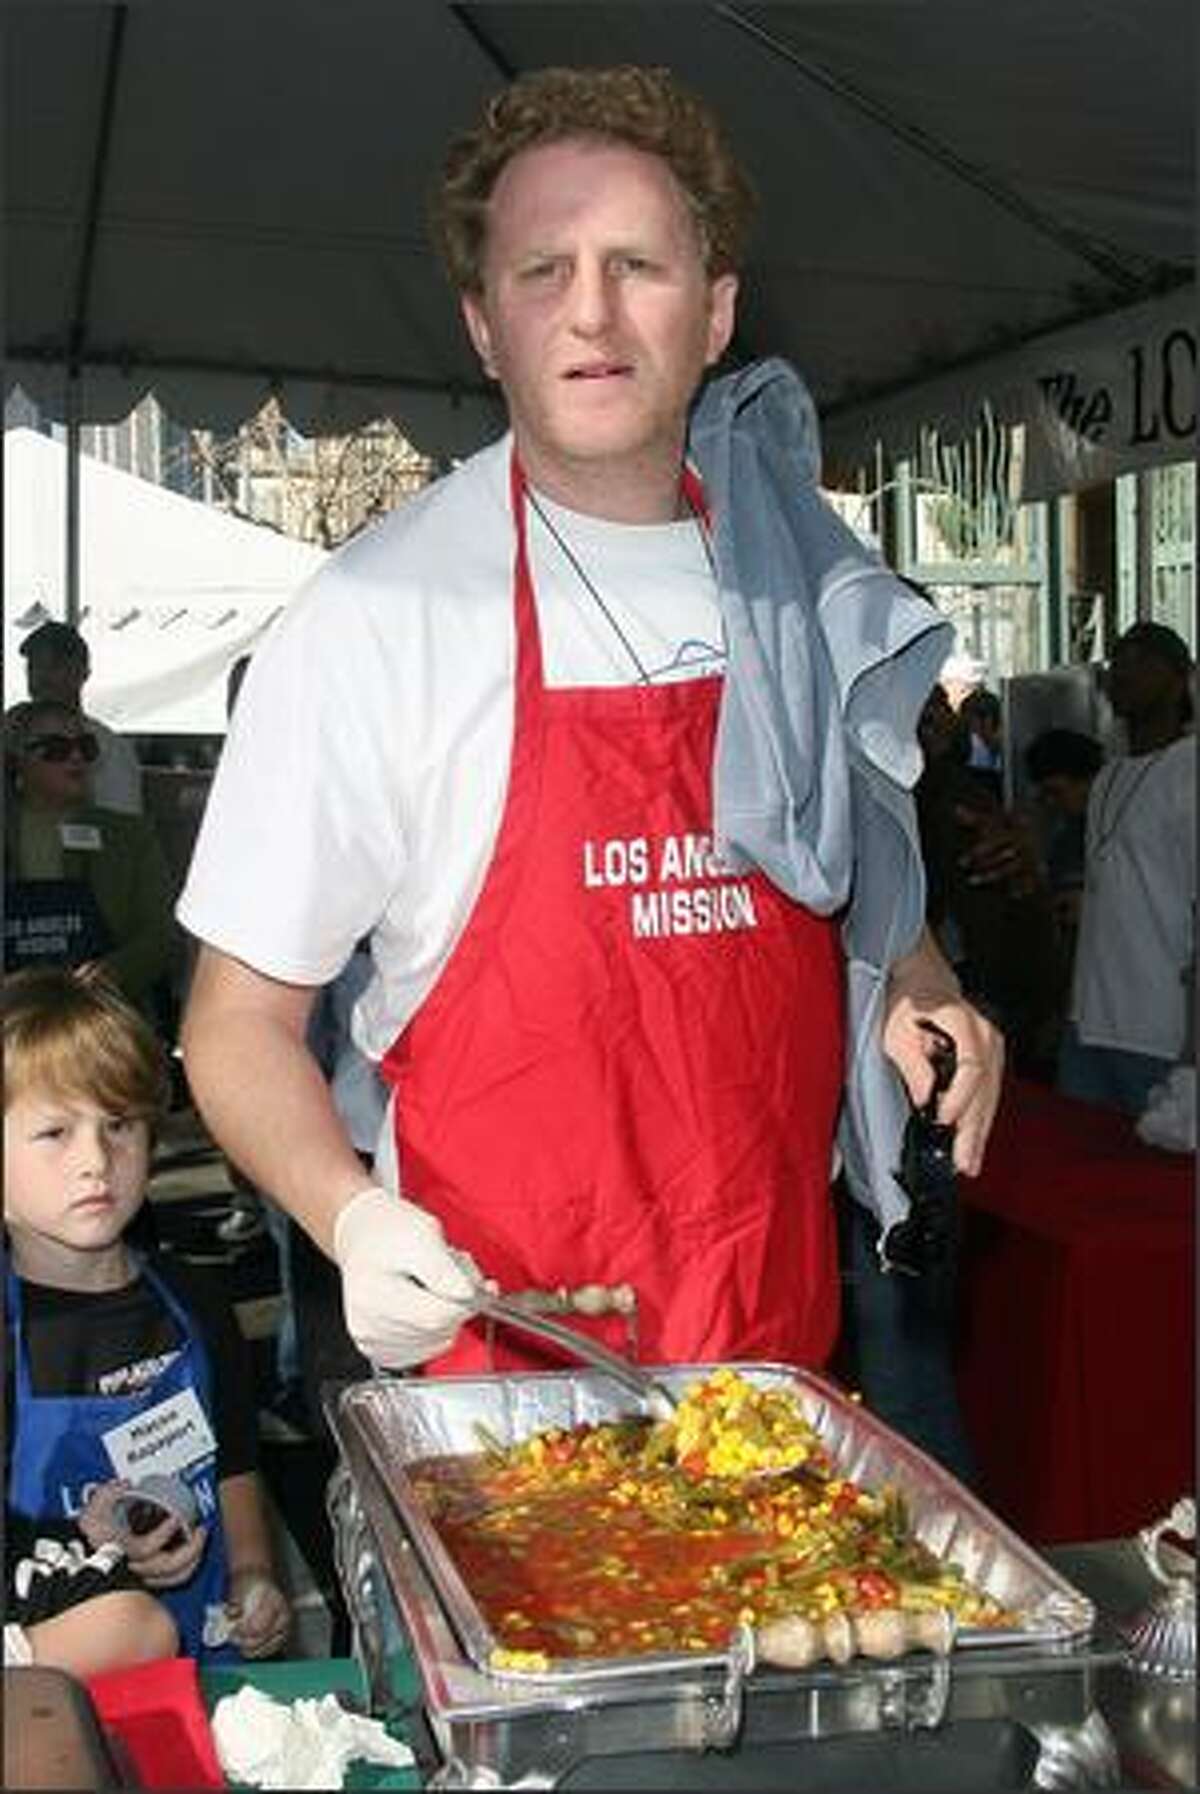 Actor Michael Rapaport and son serve Christmas meals to the homeless at the L.A. Mission in downtown Los Angeles, California.